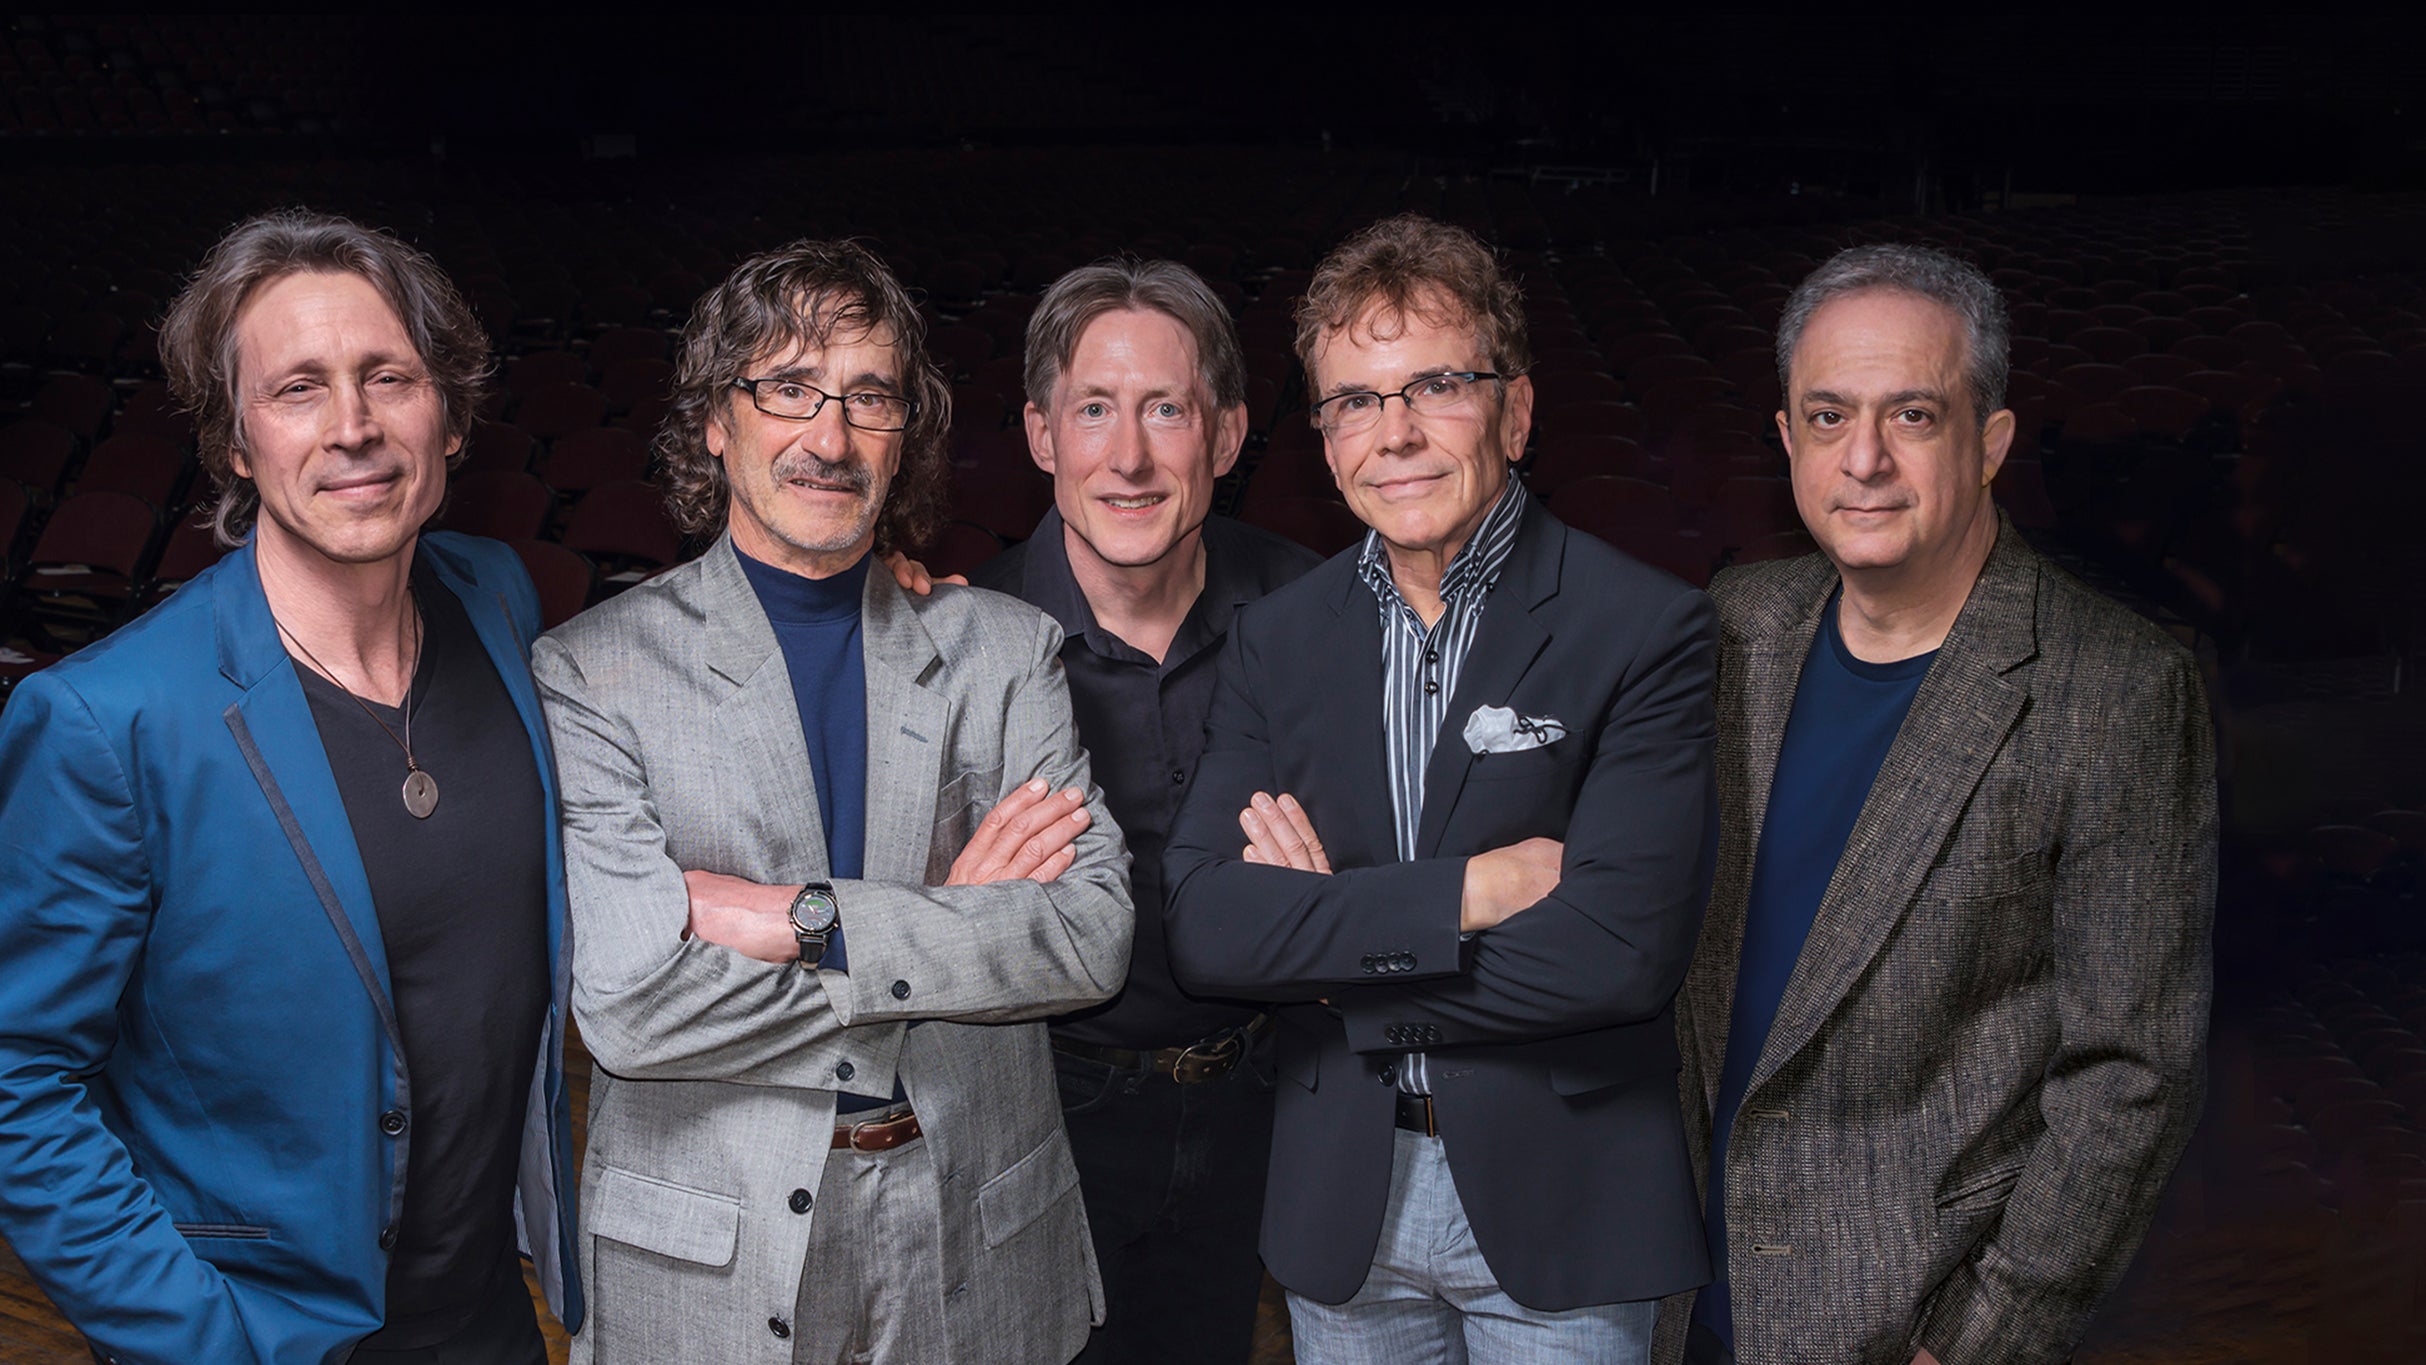 Donnie Iris & the Cruisers in Moon Township promo photo for UPMC Events Center presale offer code